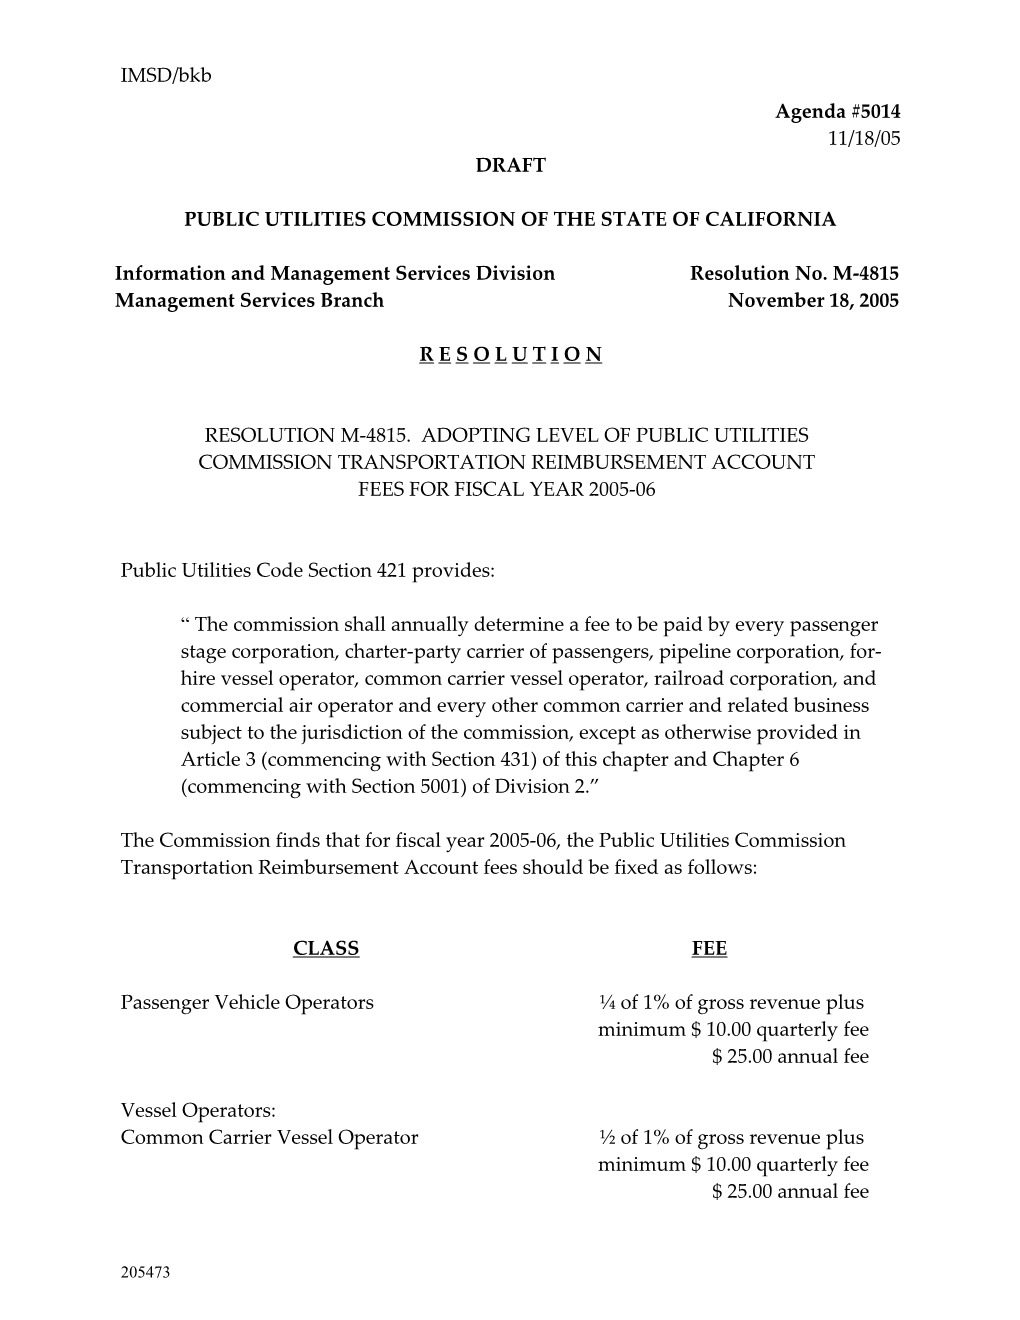 Public Utilities Commission of the State of California s108